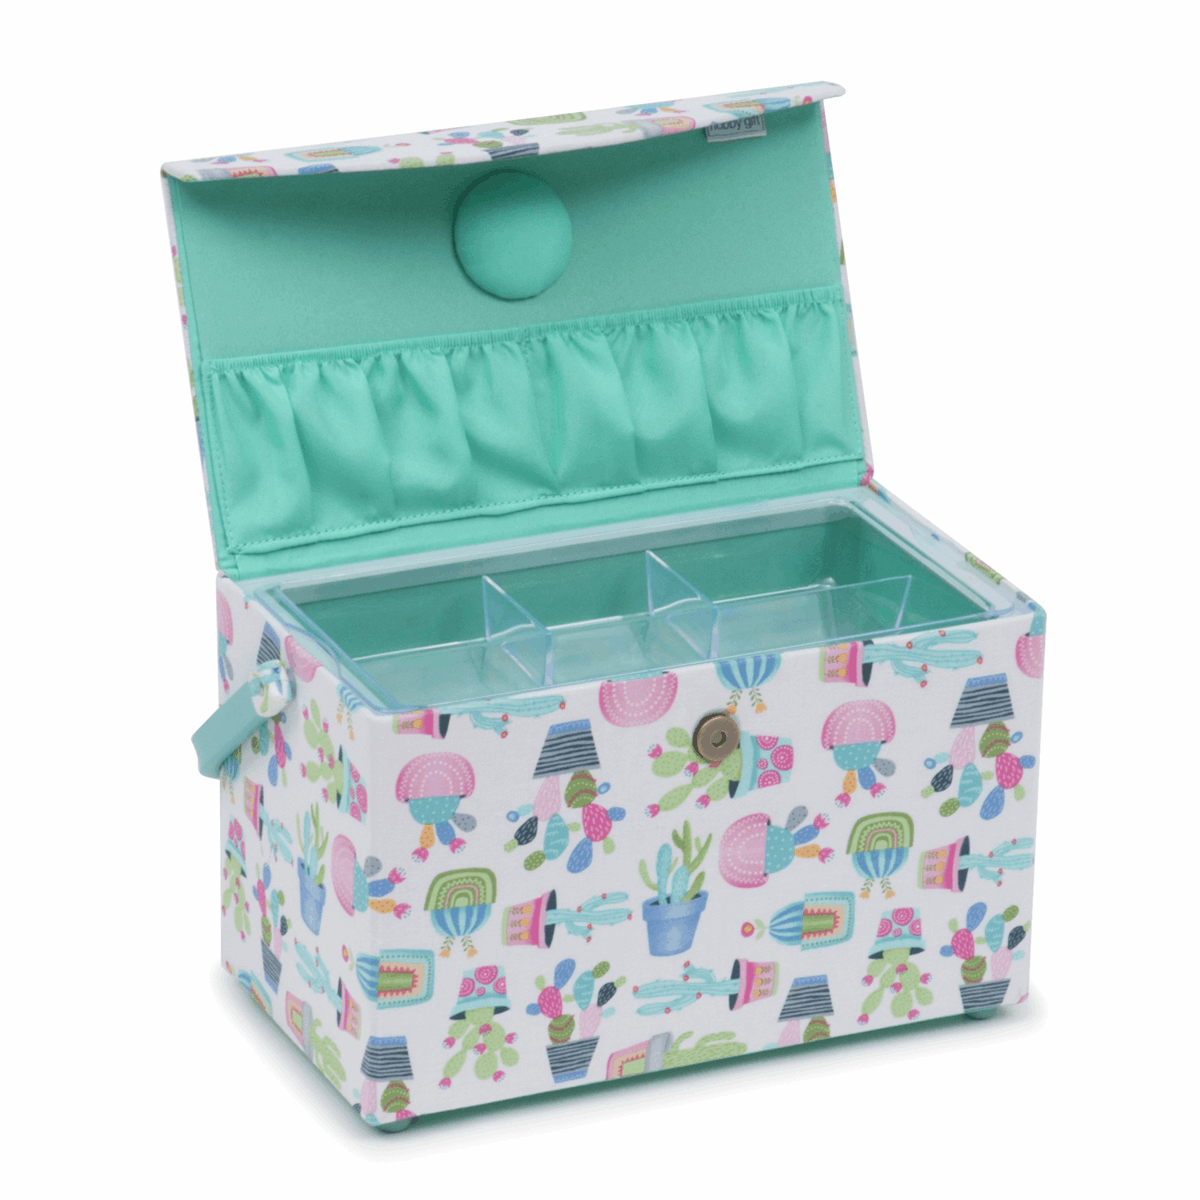 Cactus Party Sewing Box with Fold Over Lid - Medium